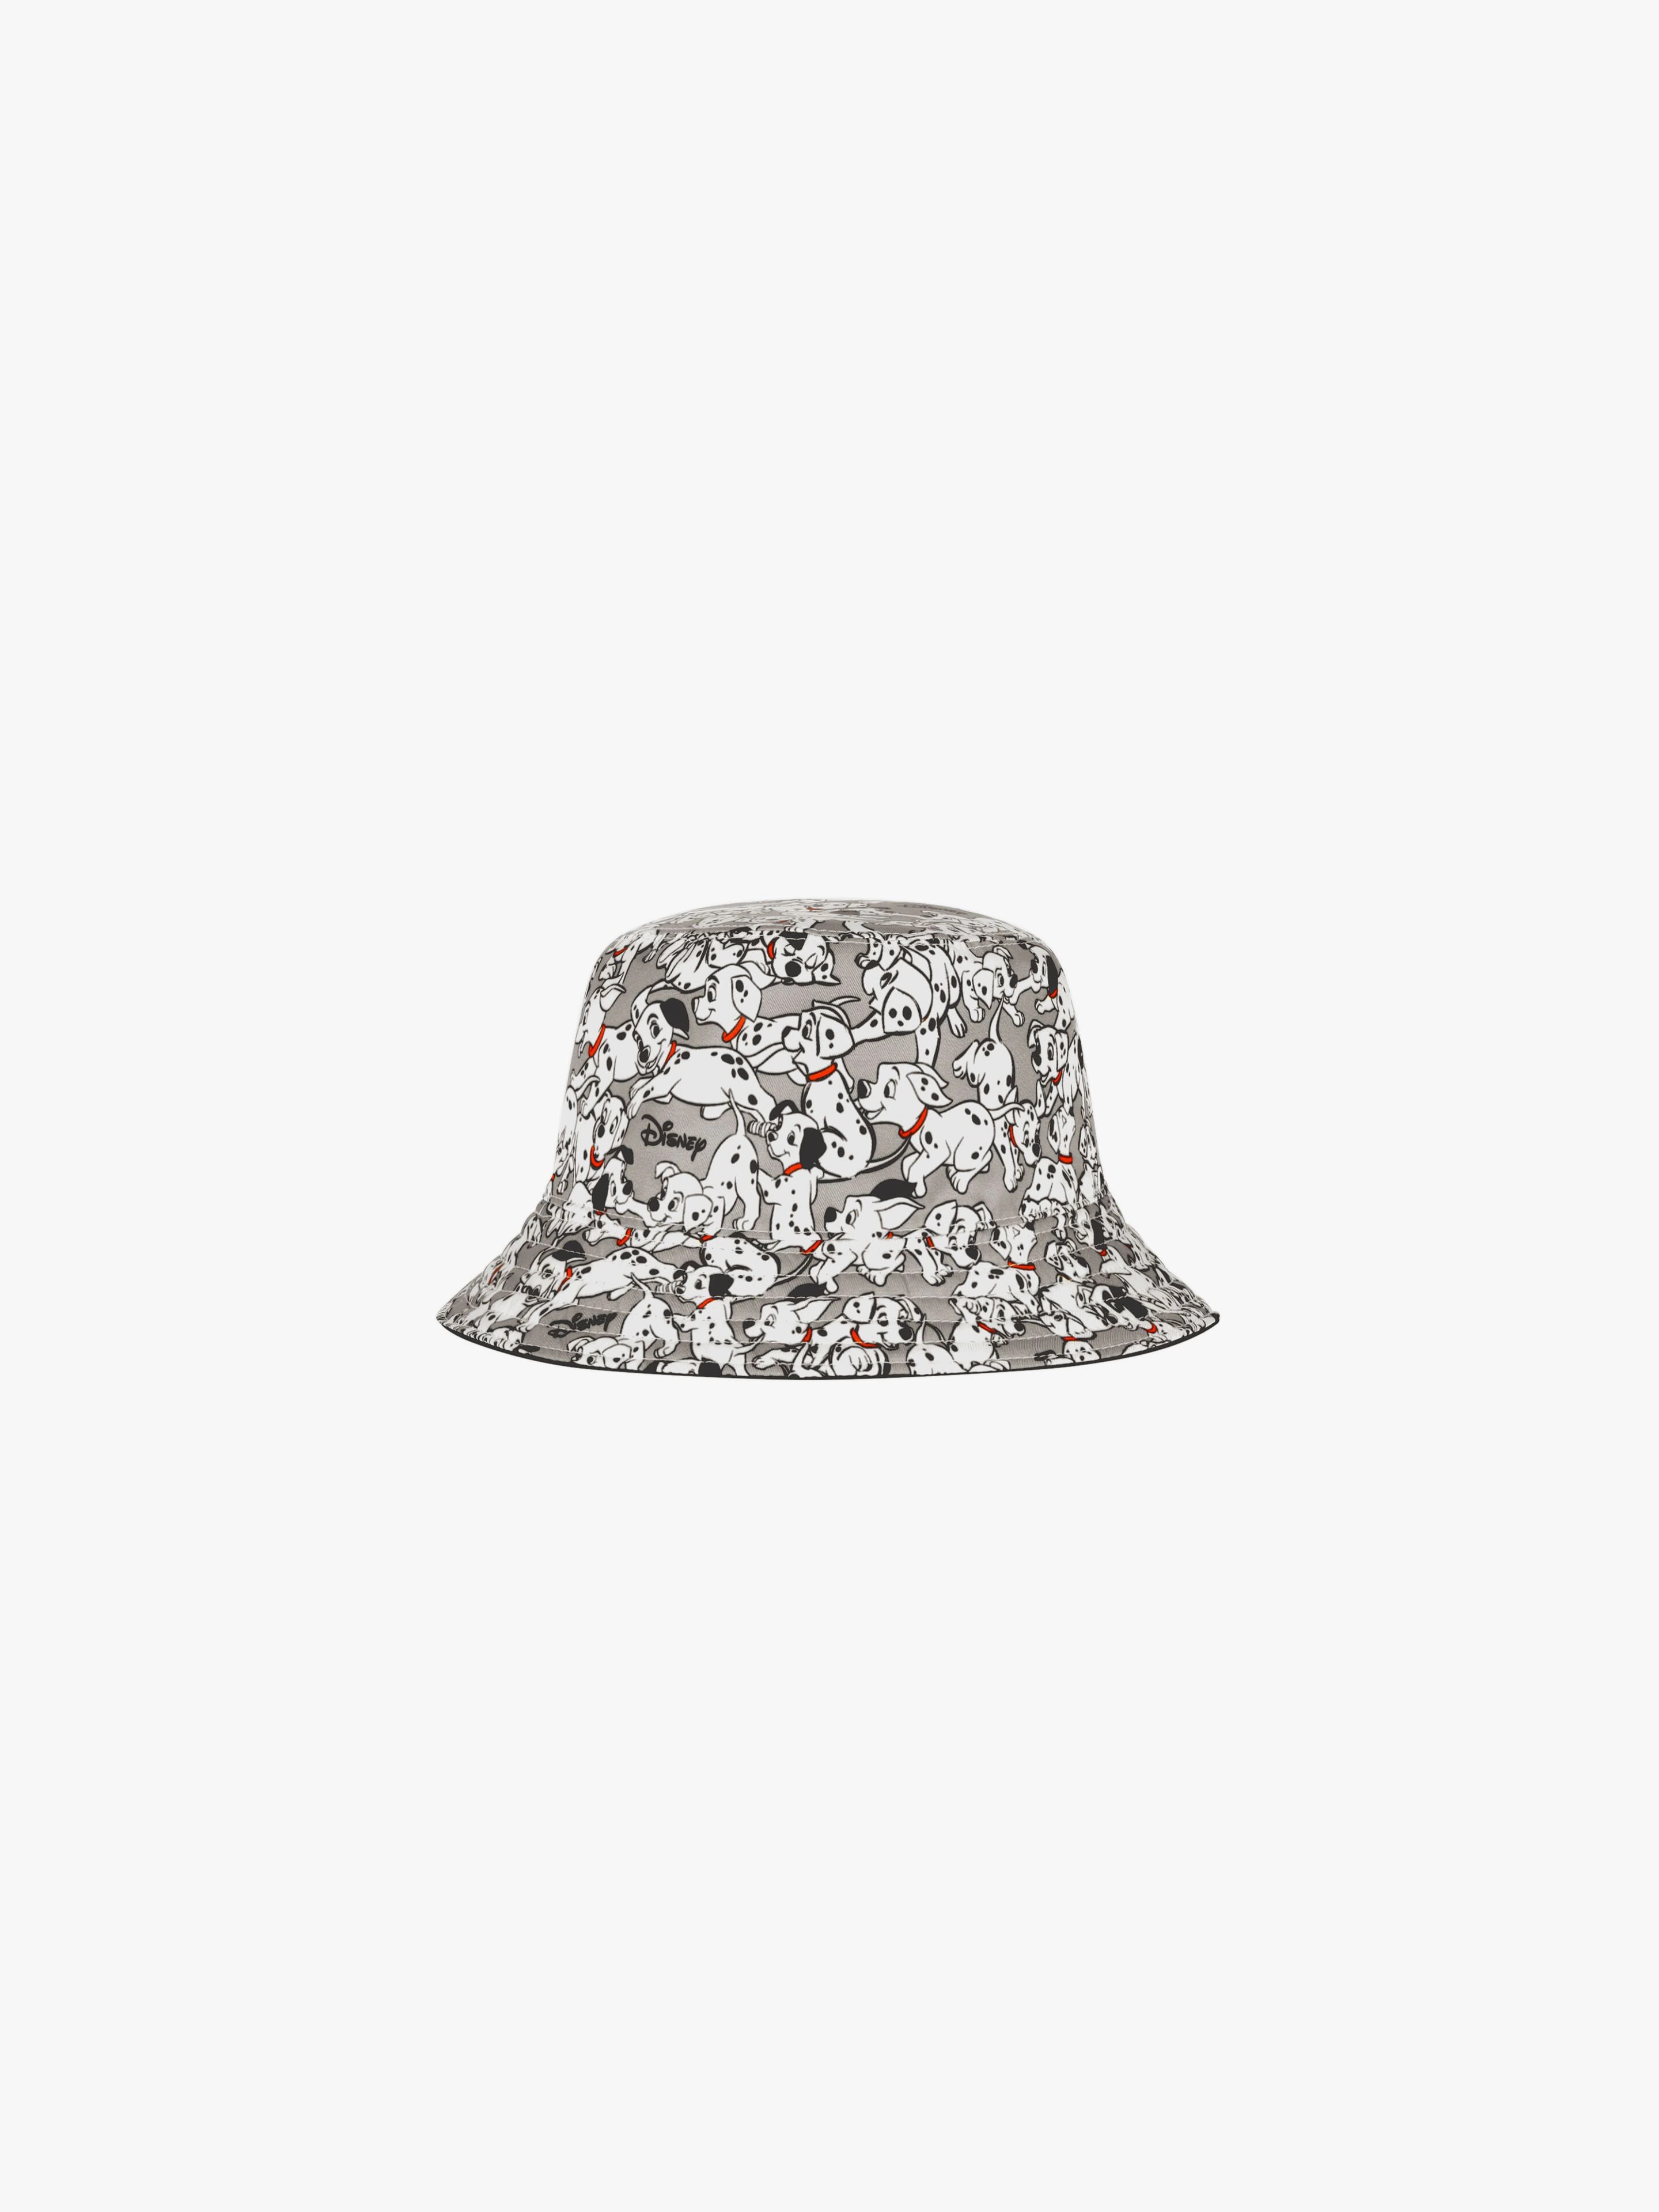 GIVENCHY 101 DALMATIANS REVERSIBLE BUCKET HAT IN PRINTED NYLON - 1